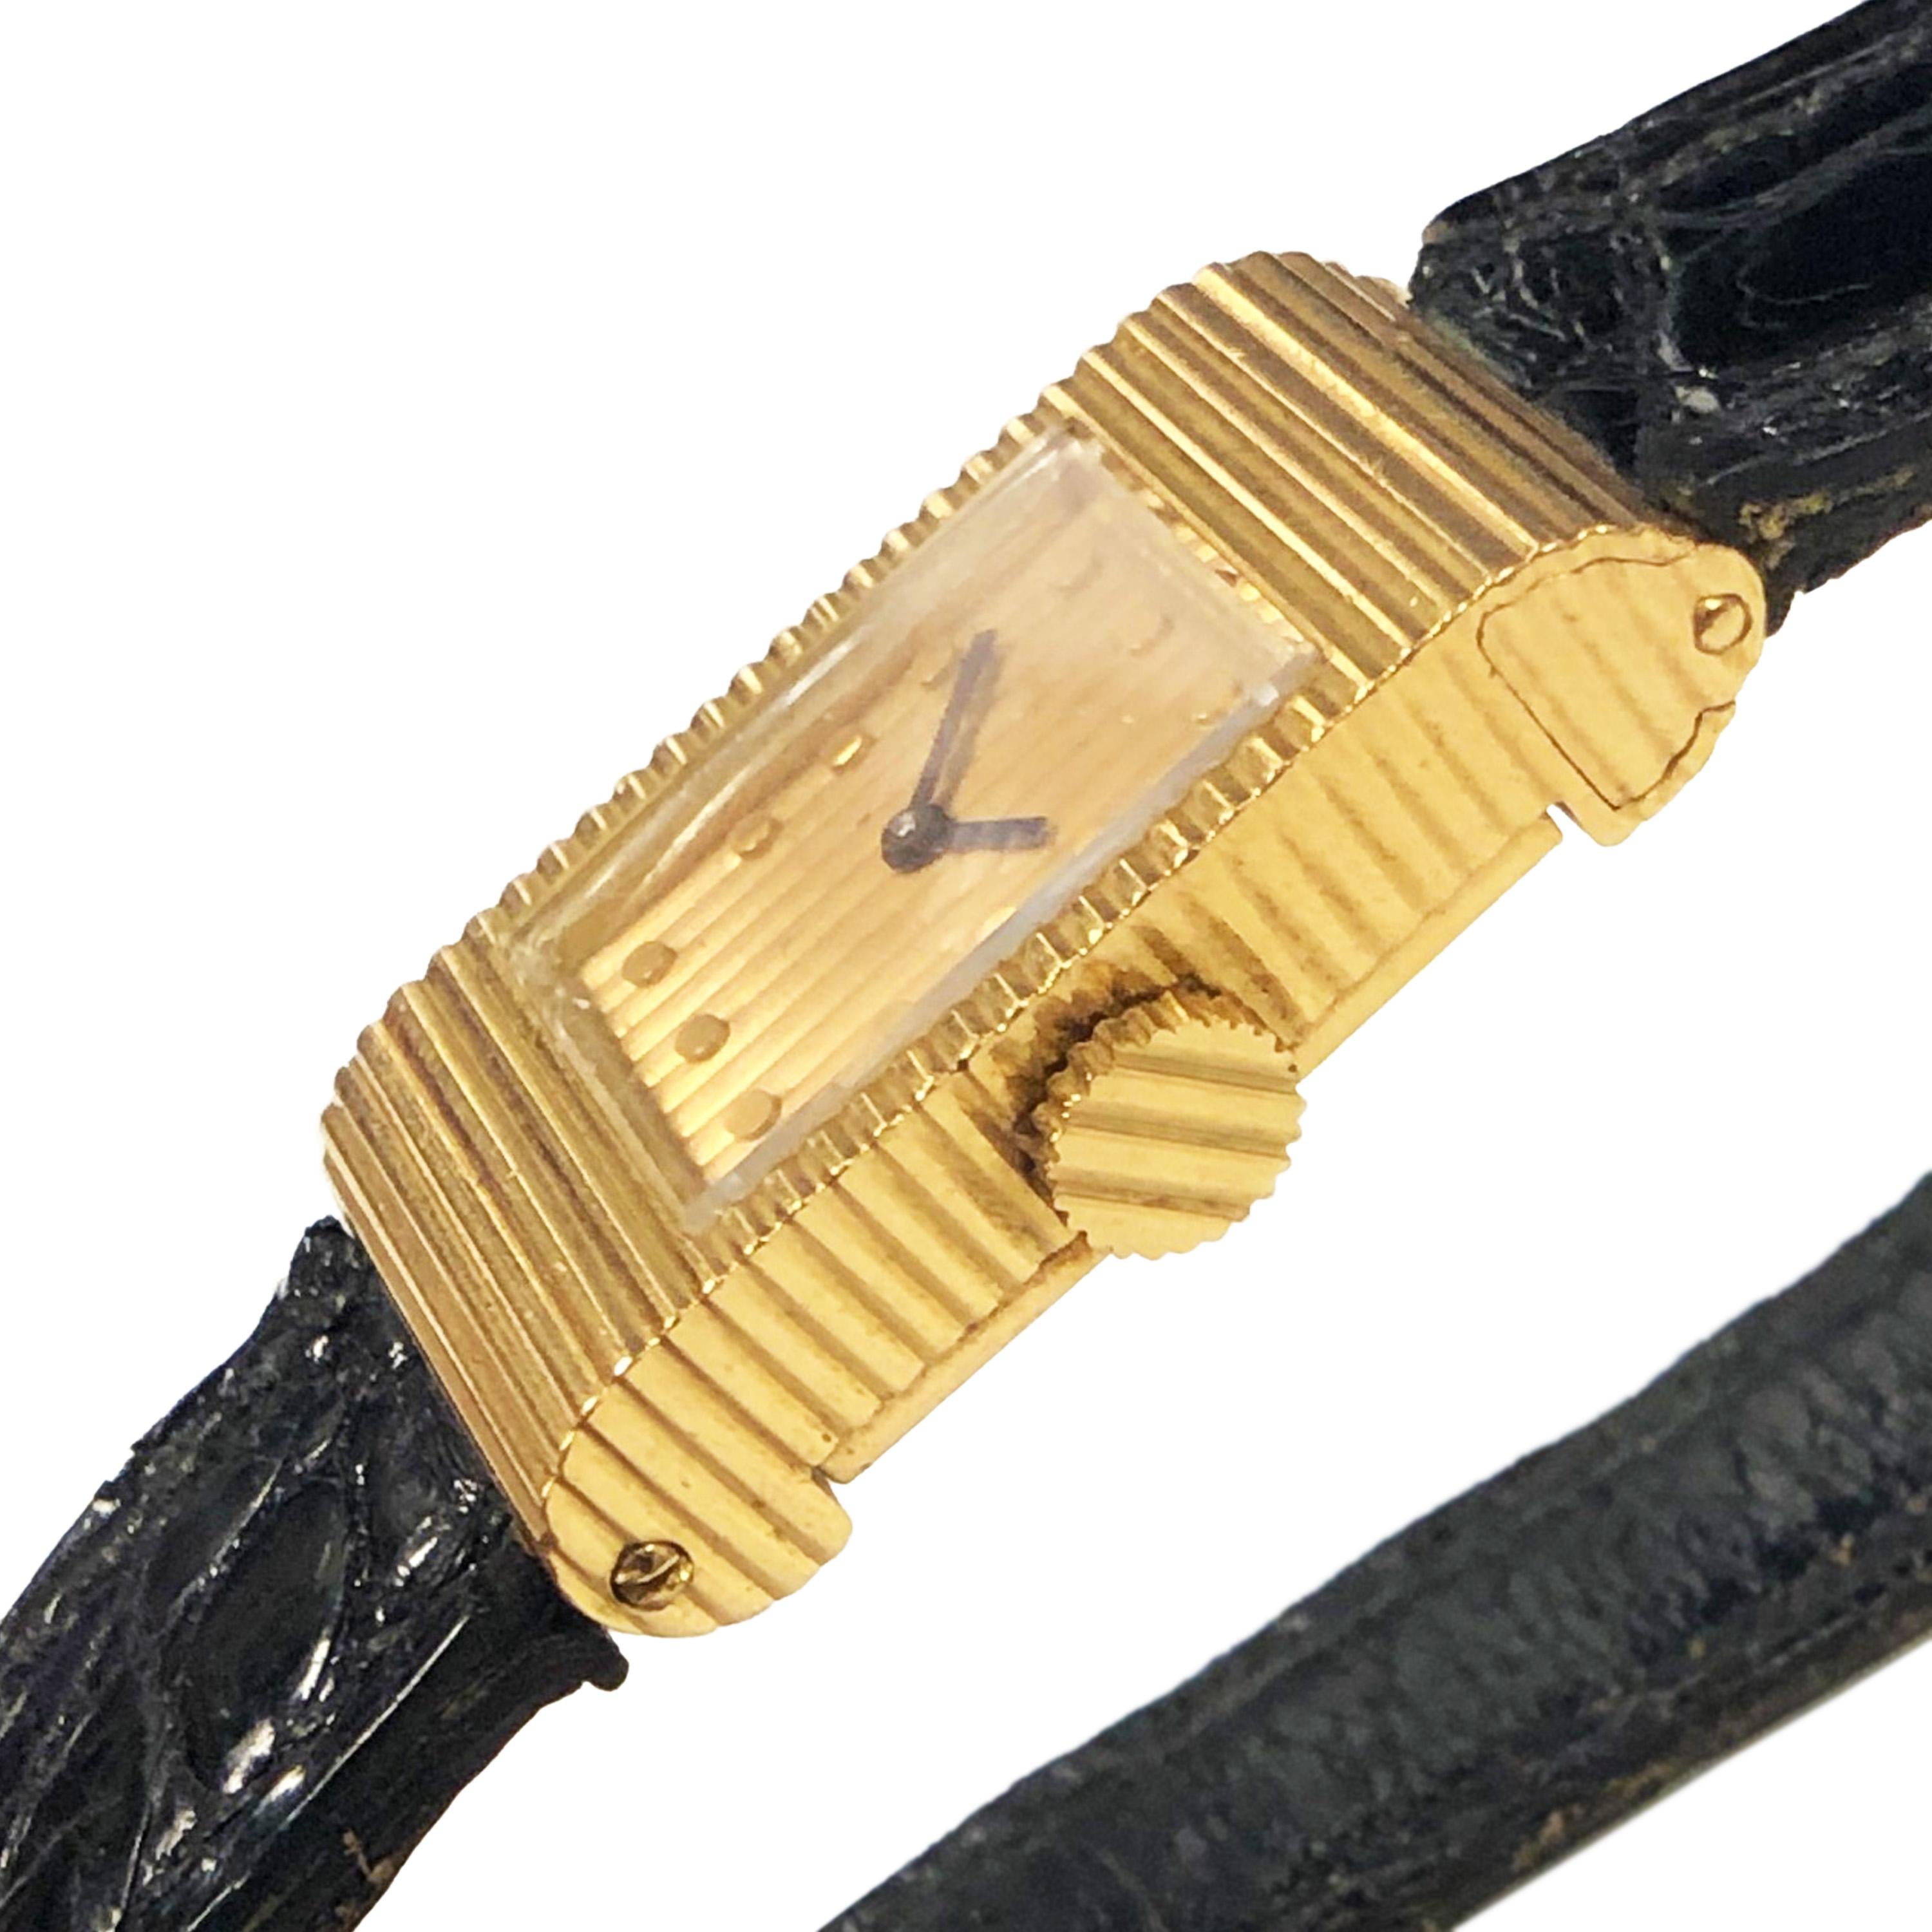 Circa 1960s Boucheron Paris Wrist Watch owned and worn by Hollywood Entertainment Icon Jerry lewis. 18K Yellow Gold 2 piece case measuring 1 X 1/2 inch, having a ribbed design with a unique hidden slide fitting where the Strap fits into the case. 17